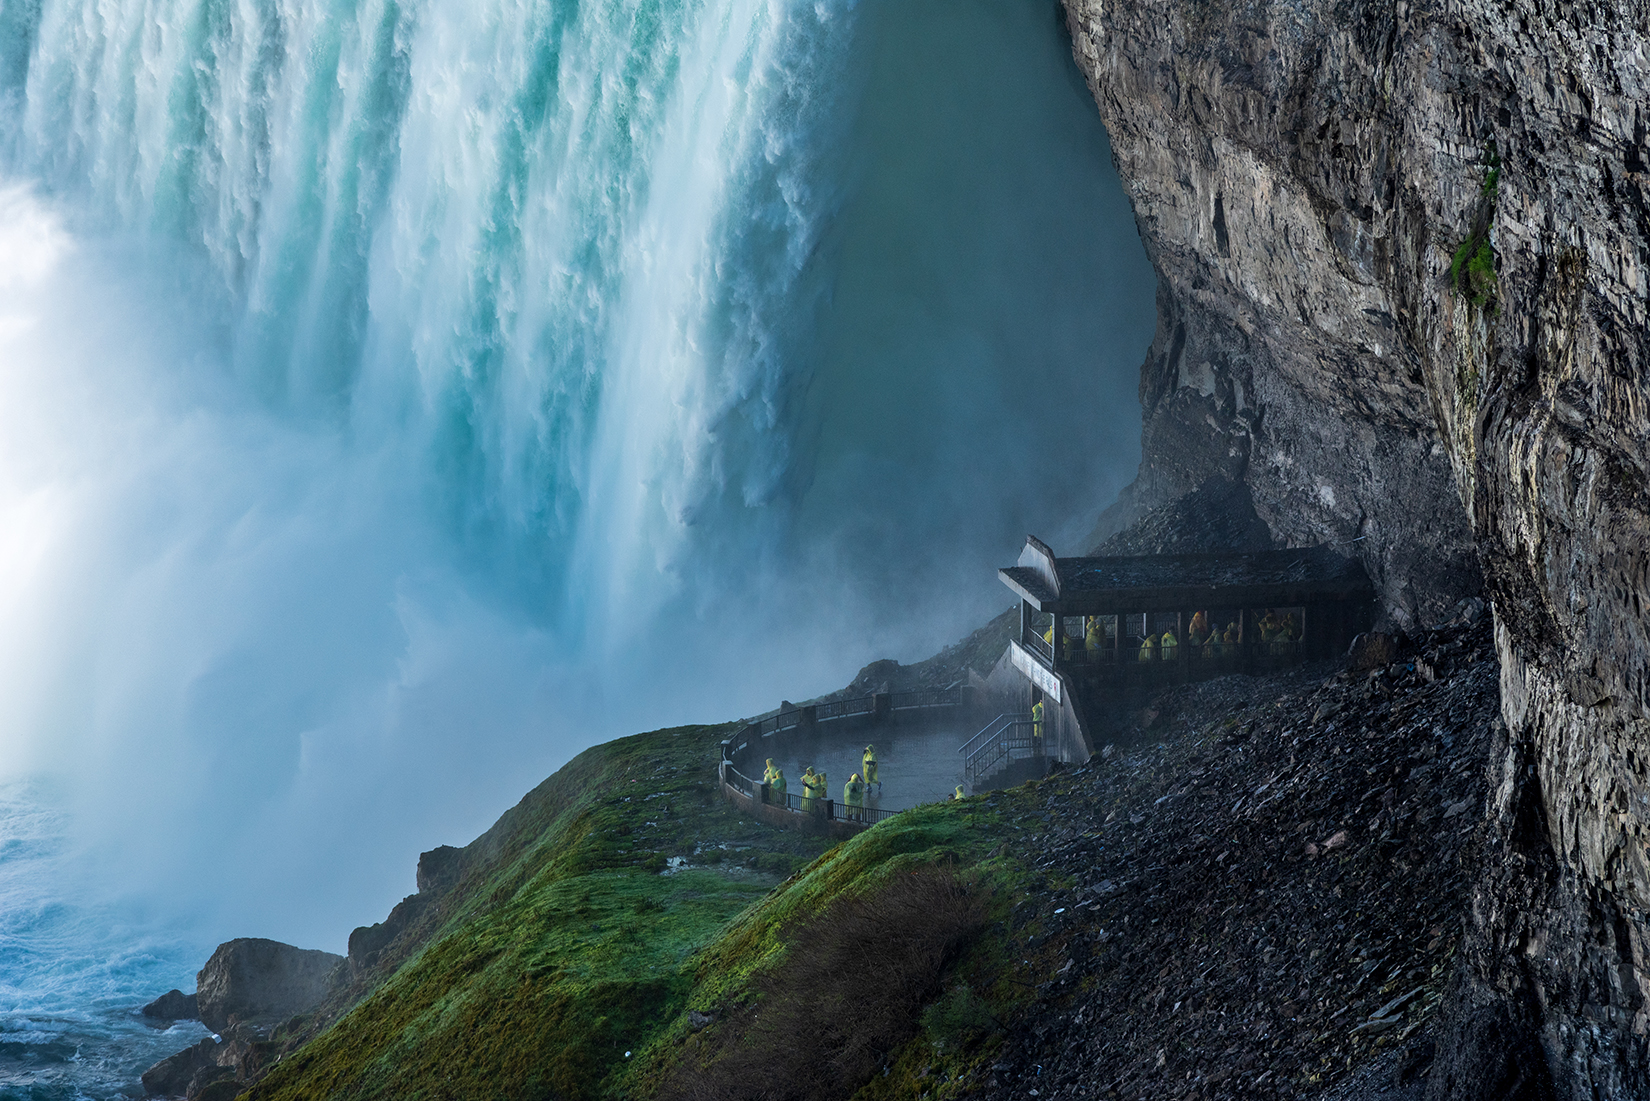 Journey Behind the Falls observation platform and series of tunnels near the bottom of the Horseshoe Falls